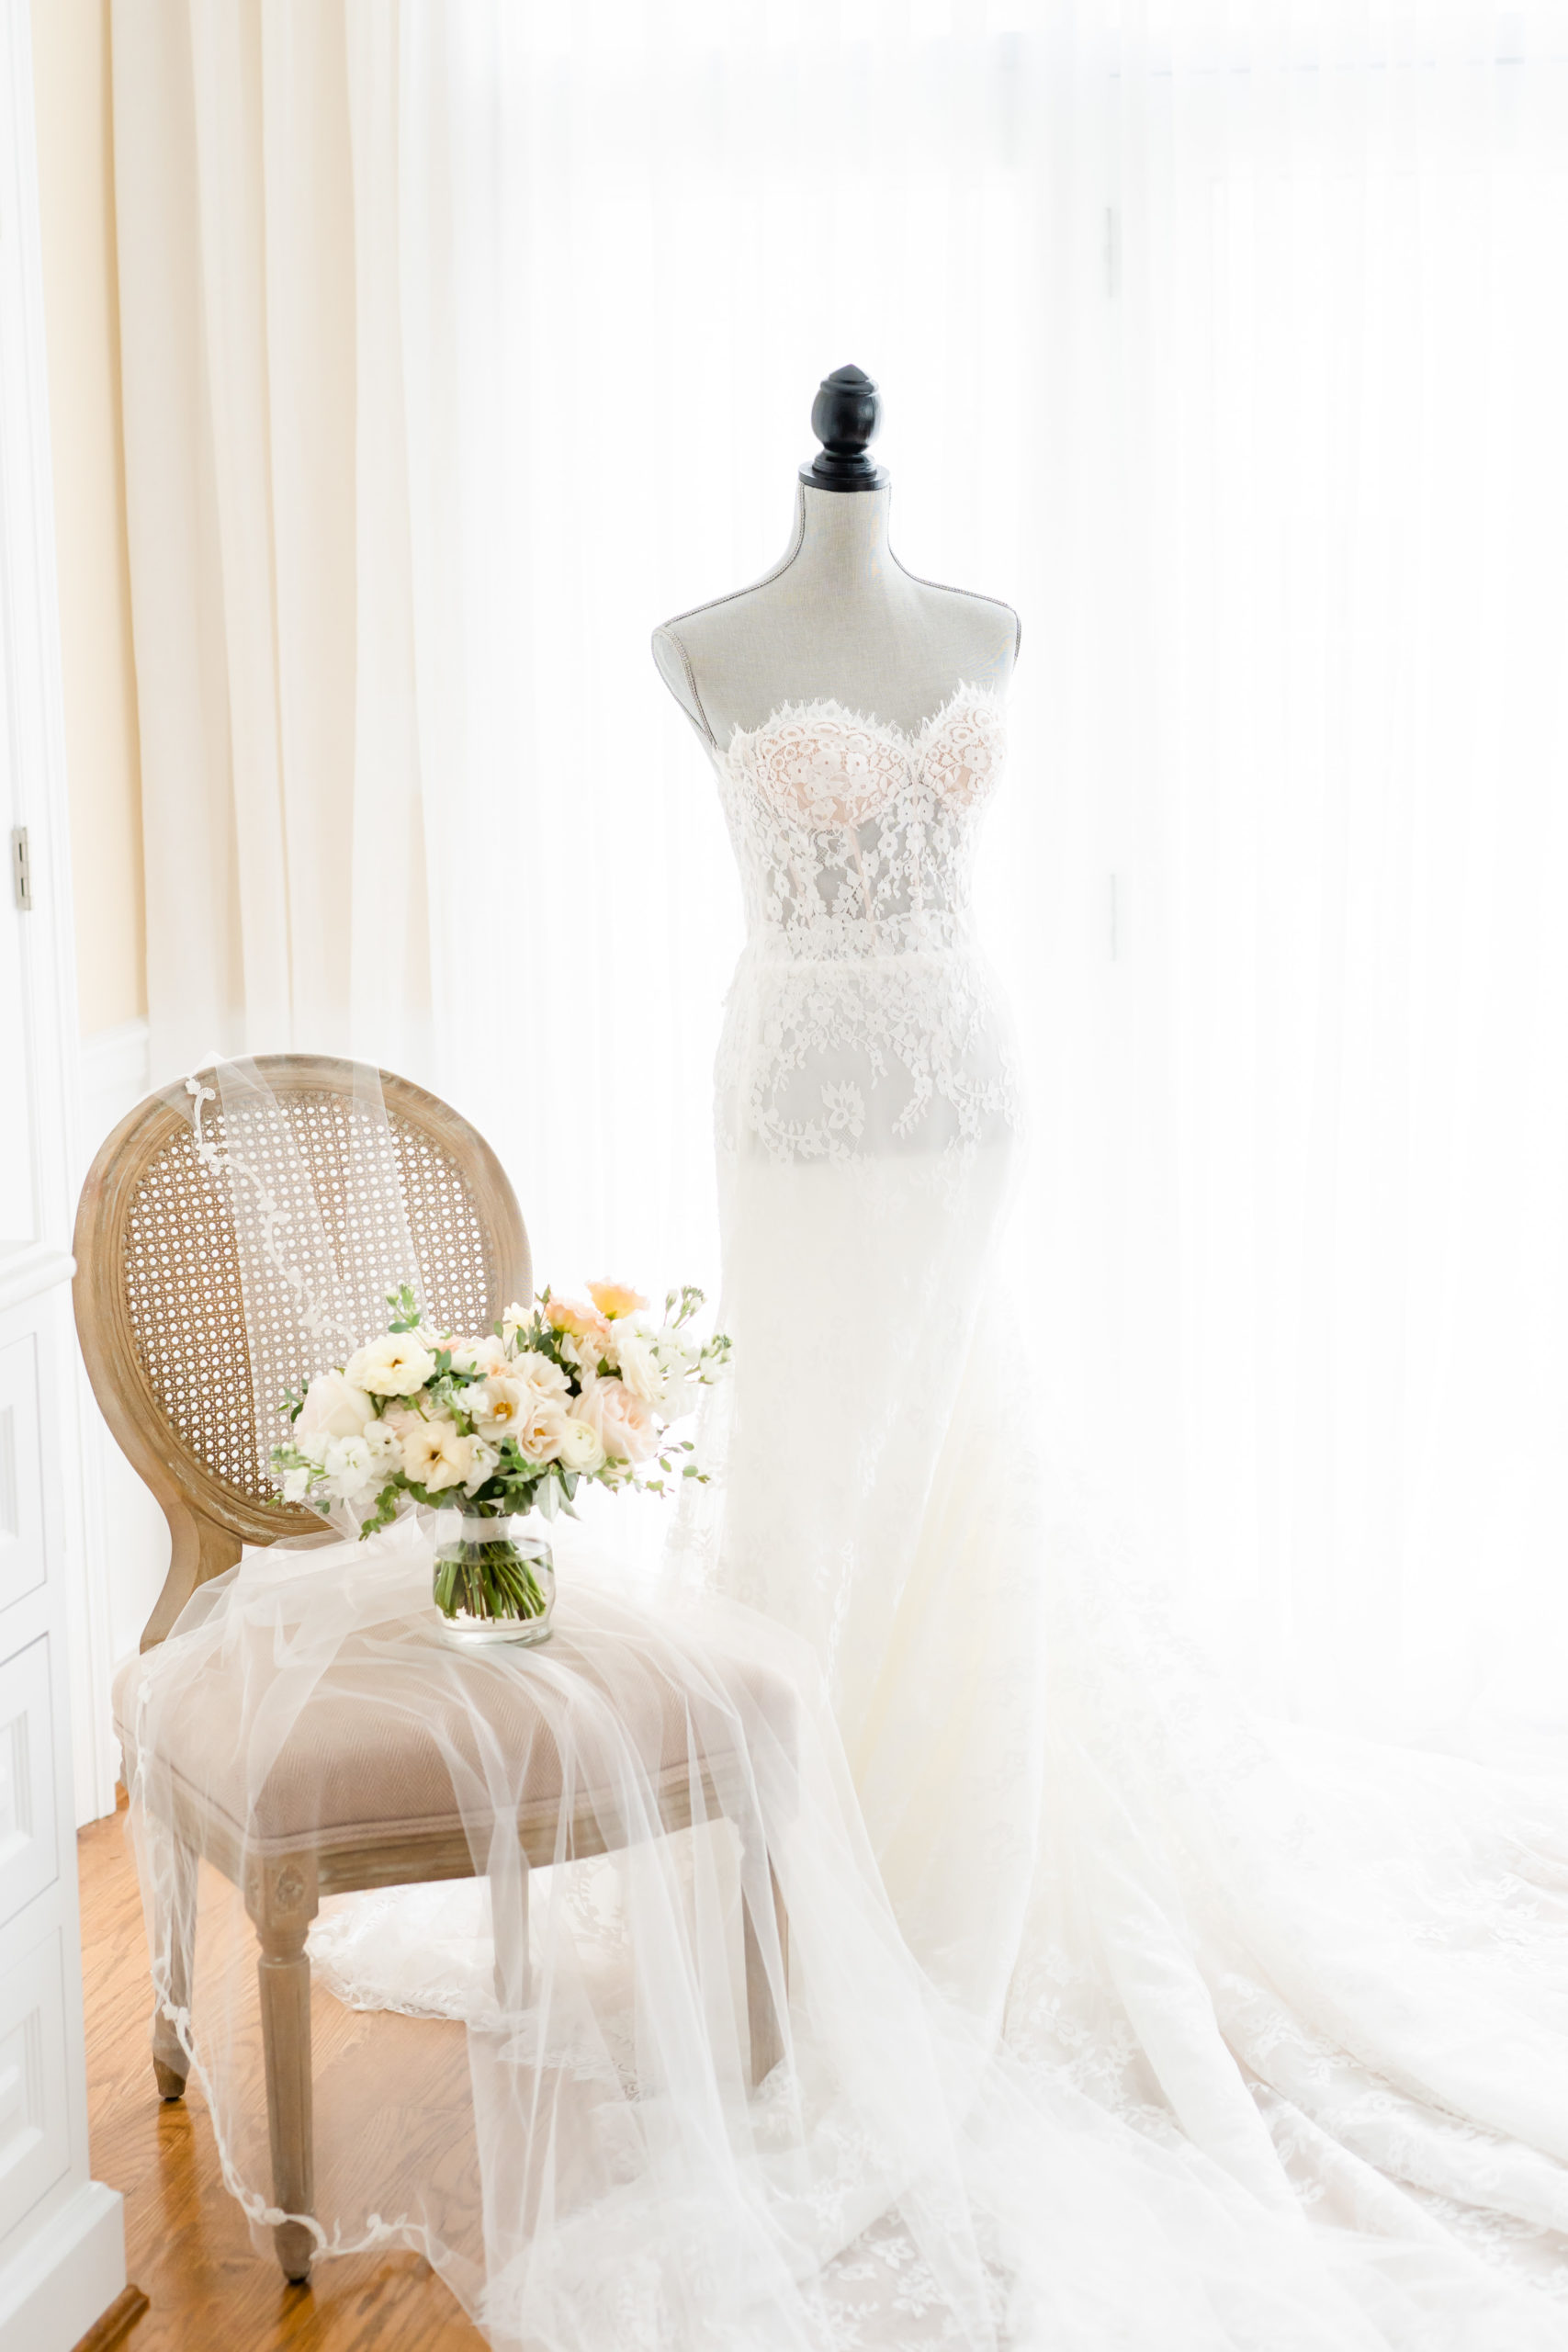 wedding dress and bouquet on tan chair